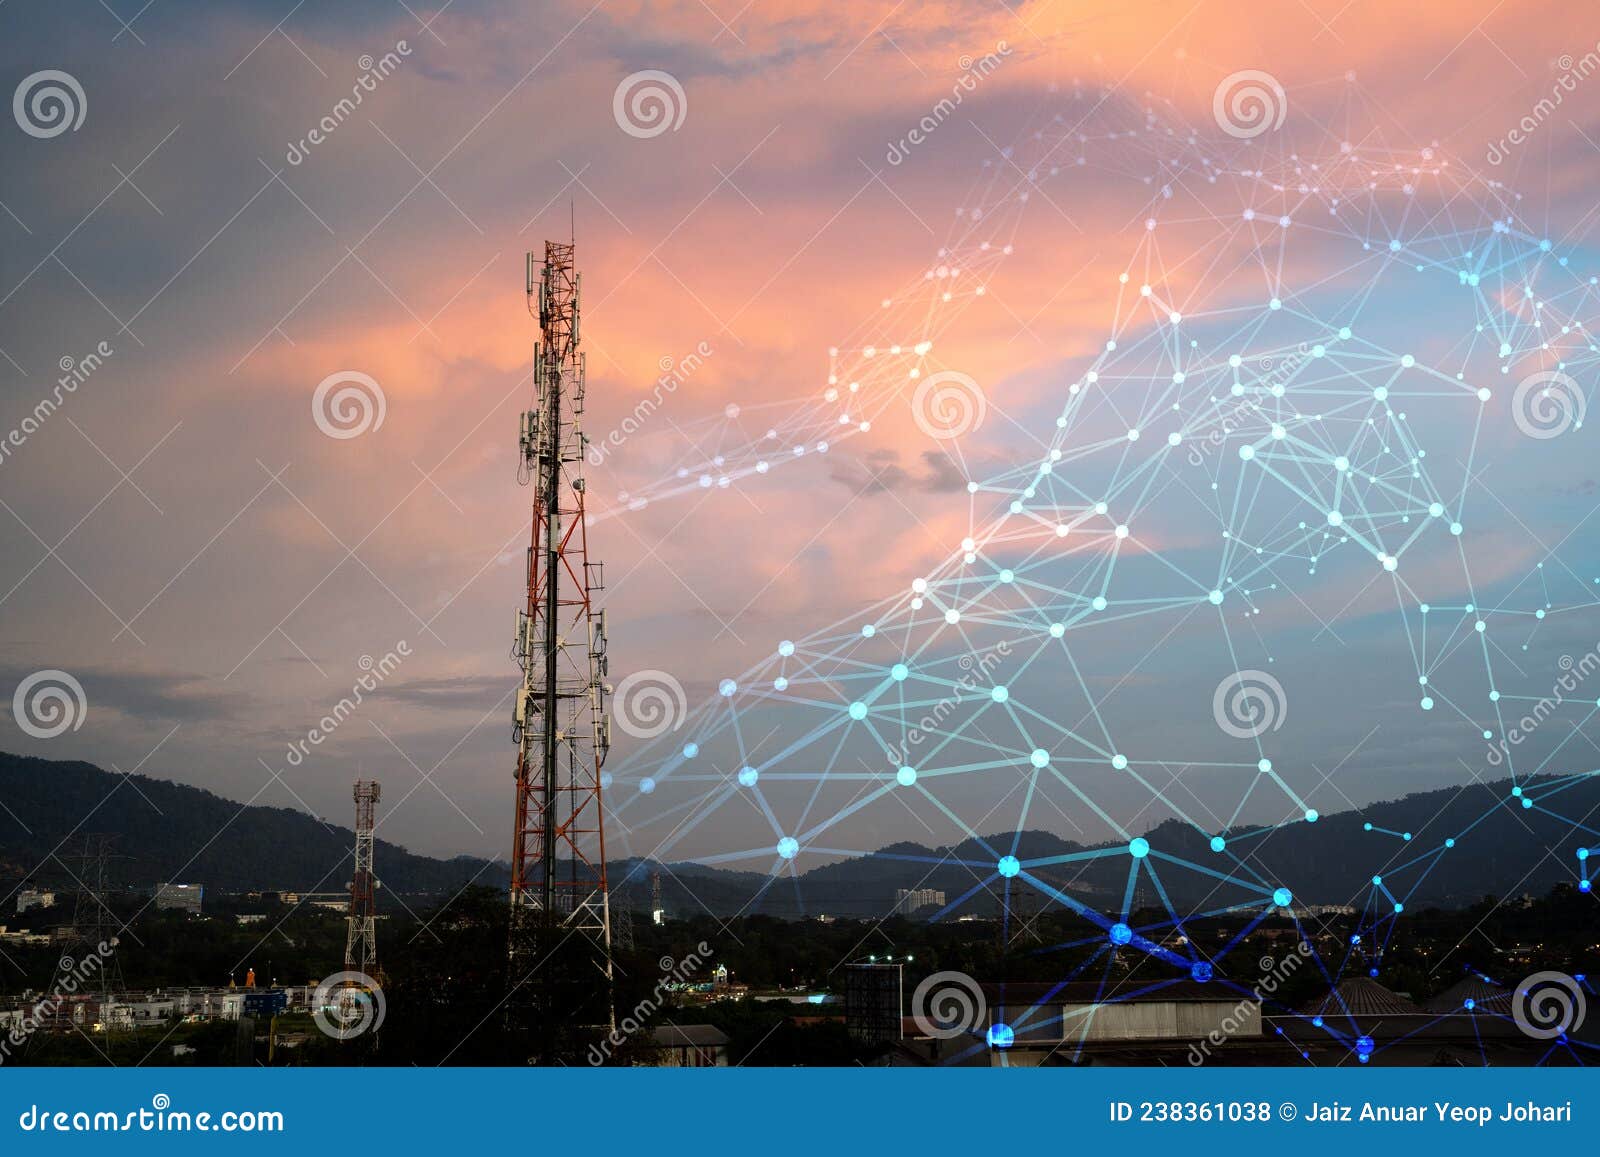 telecommunication tower for 2g 3g 4g 5g network during sunset. antenna, bts, microwave, repeater, base station, iot. technology